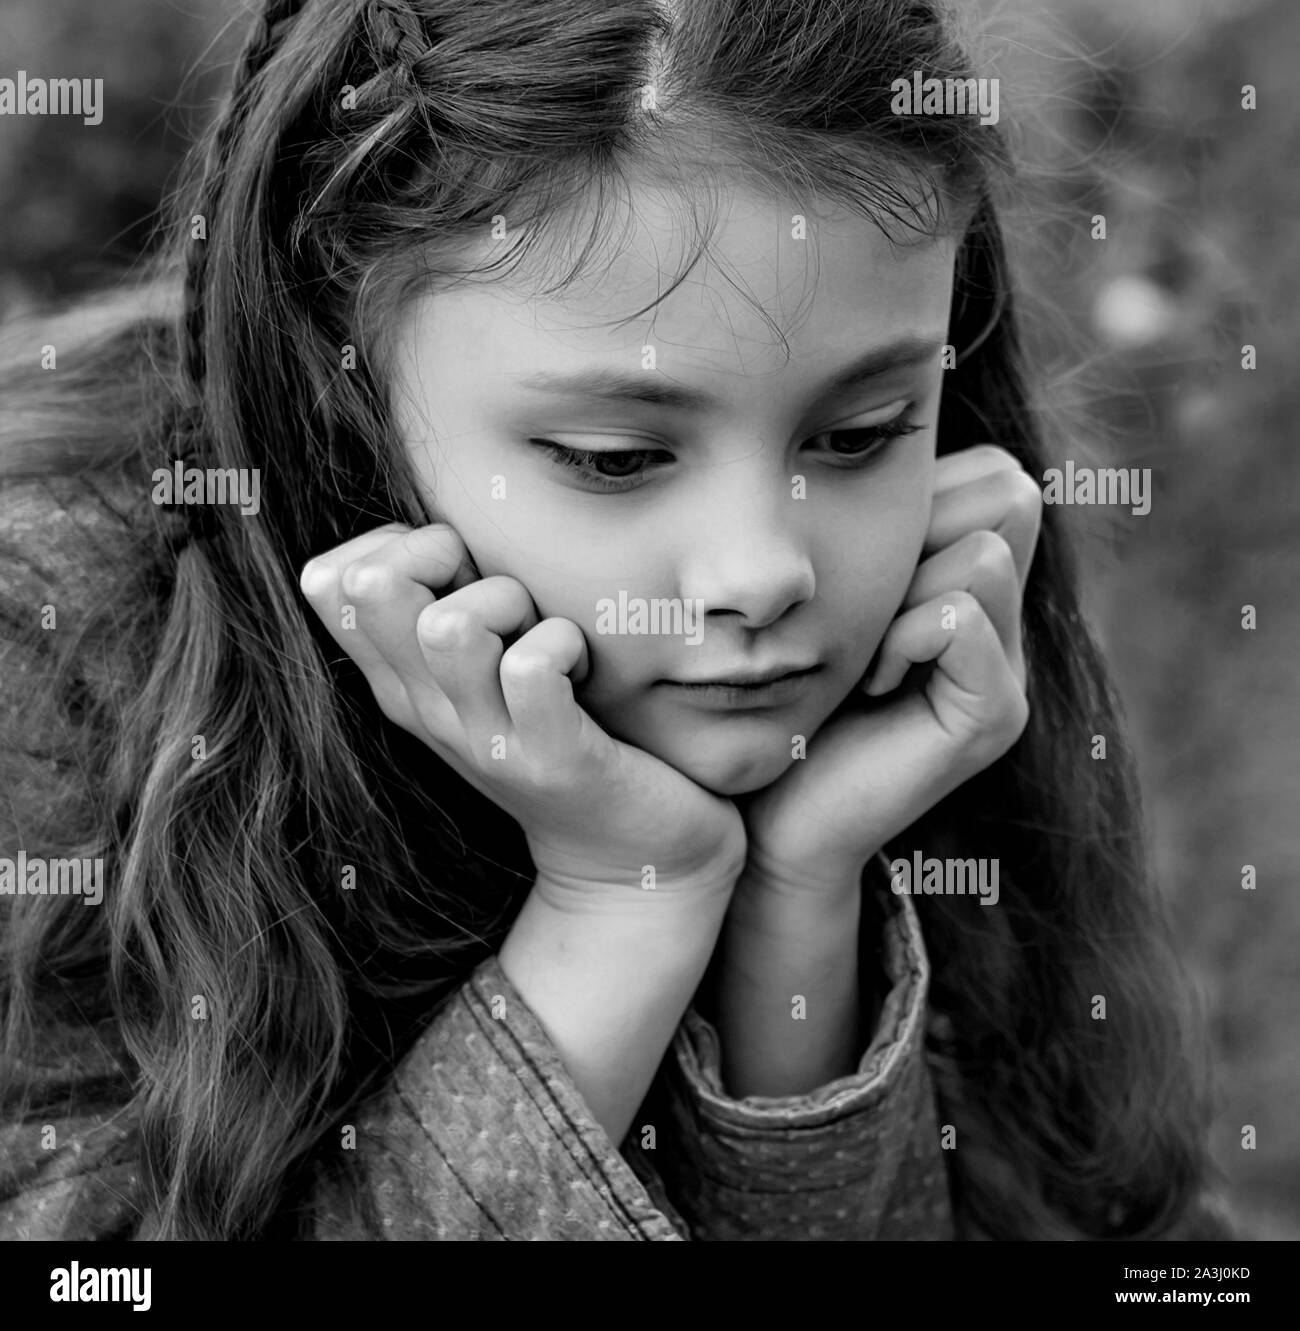 Premium Photo  Child girl sad profile face close up with hands on